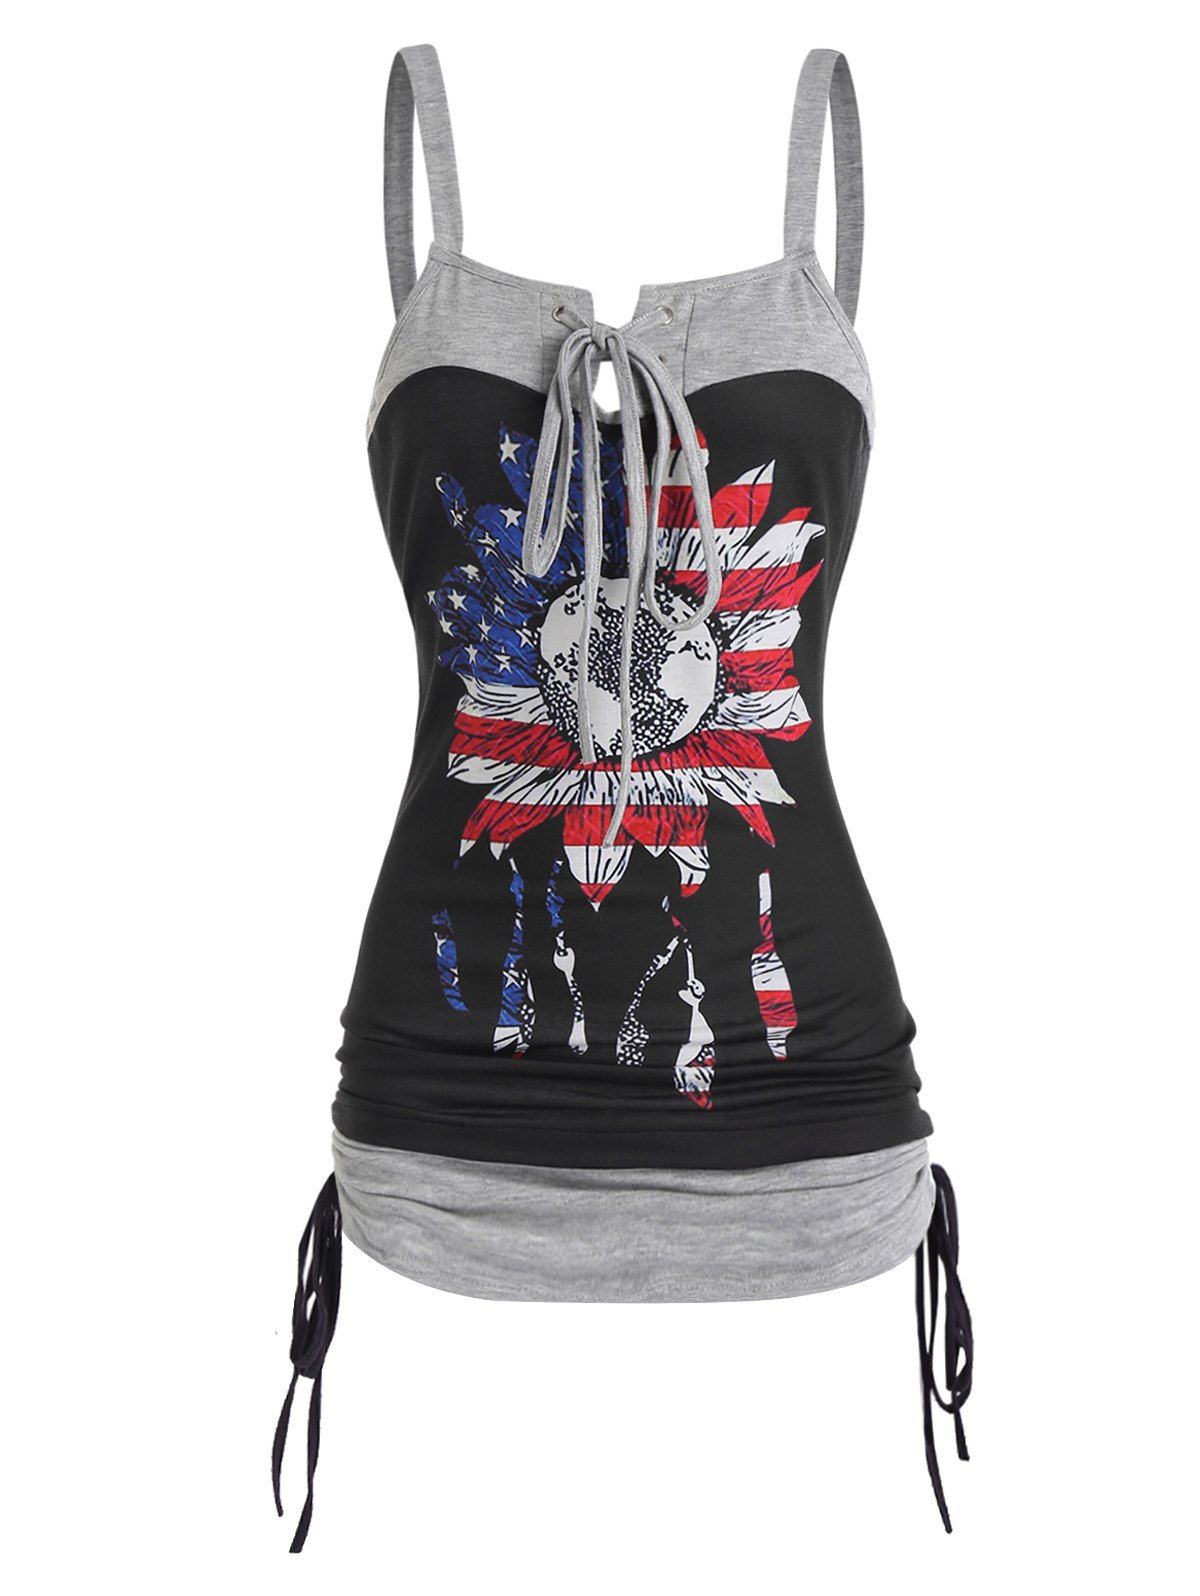 Floral Print Casual Tank Top Contrast Colorblock Lace Up Cinched American Flag Summer Top - BLACK S